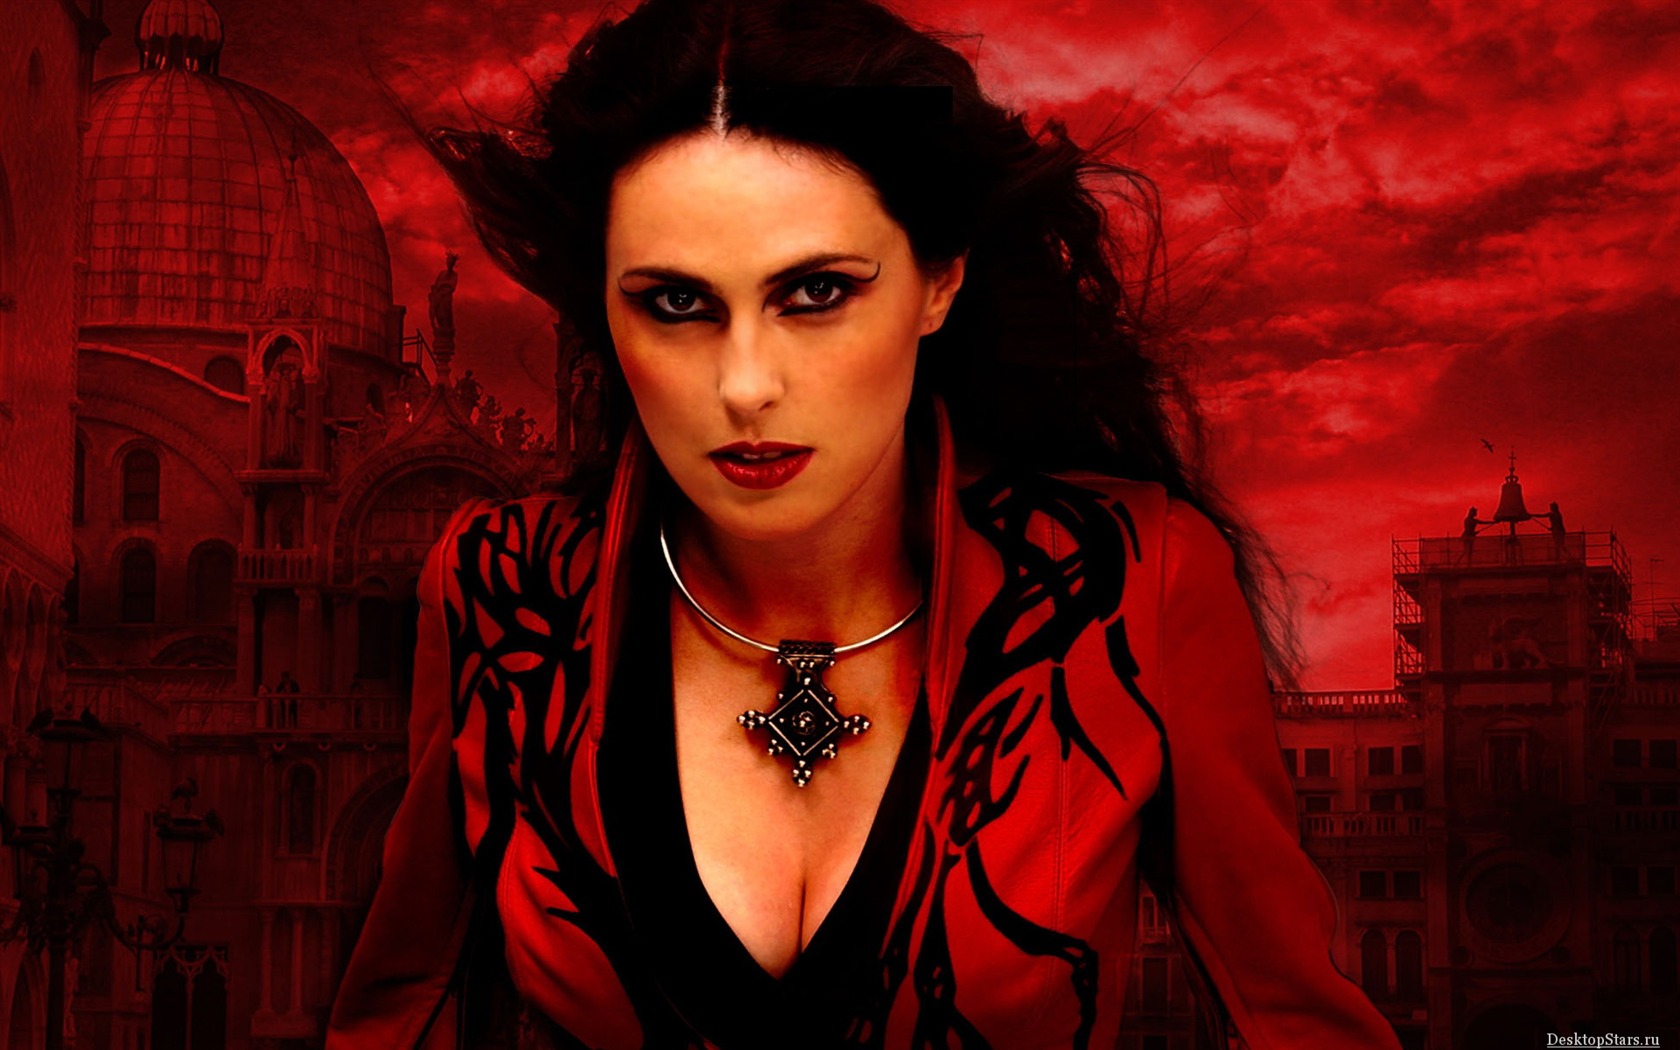 Sharon den Adel #009 - 1680x1050 Wallpapers Pictures Photos Images